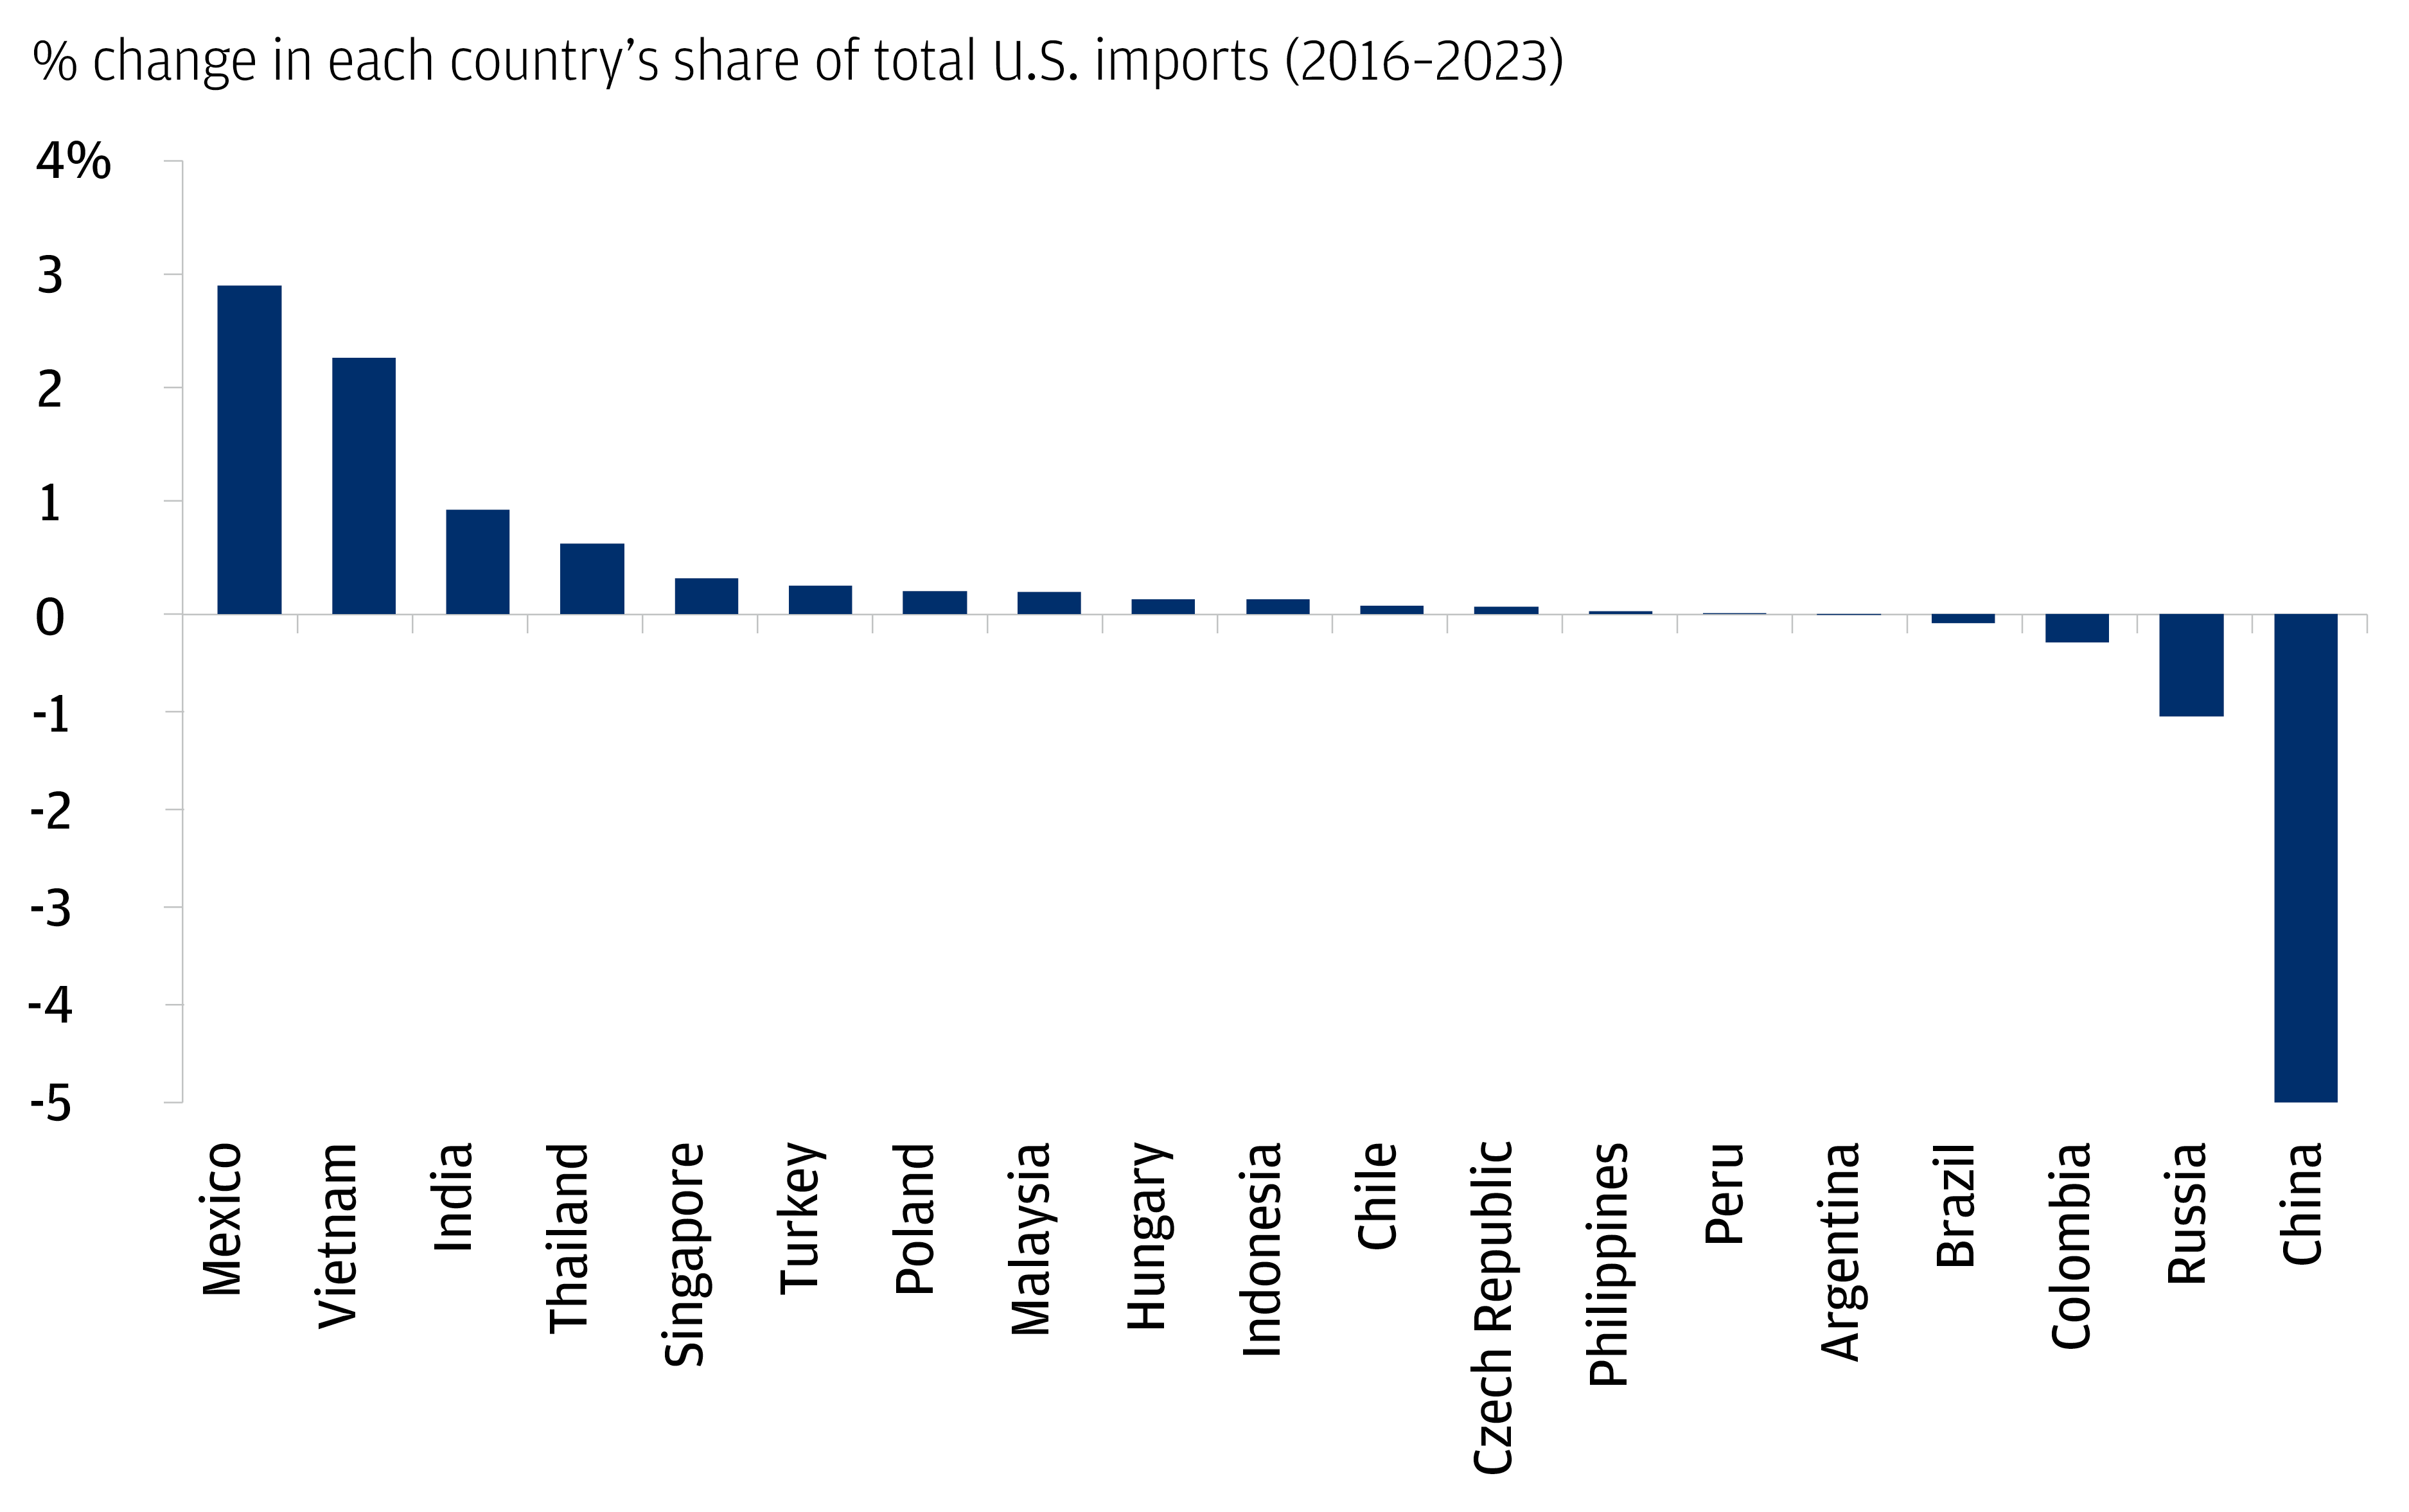 The chart the % change in each country’s share of total U.S. imports from 2016 to 2023 (ranked from highest to lowest).